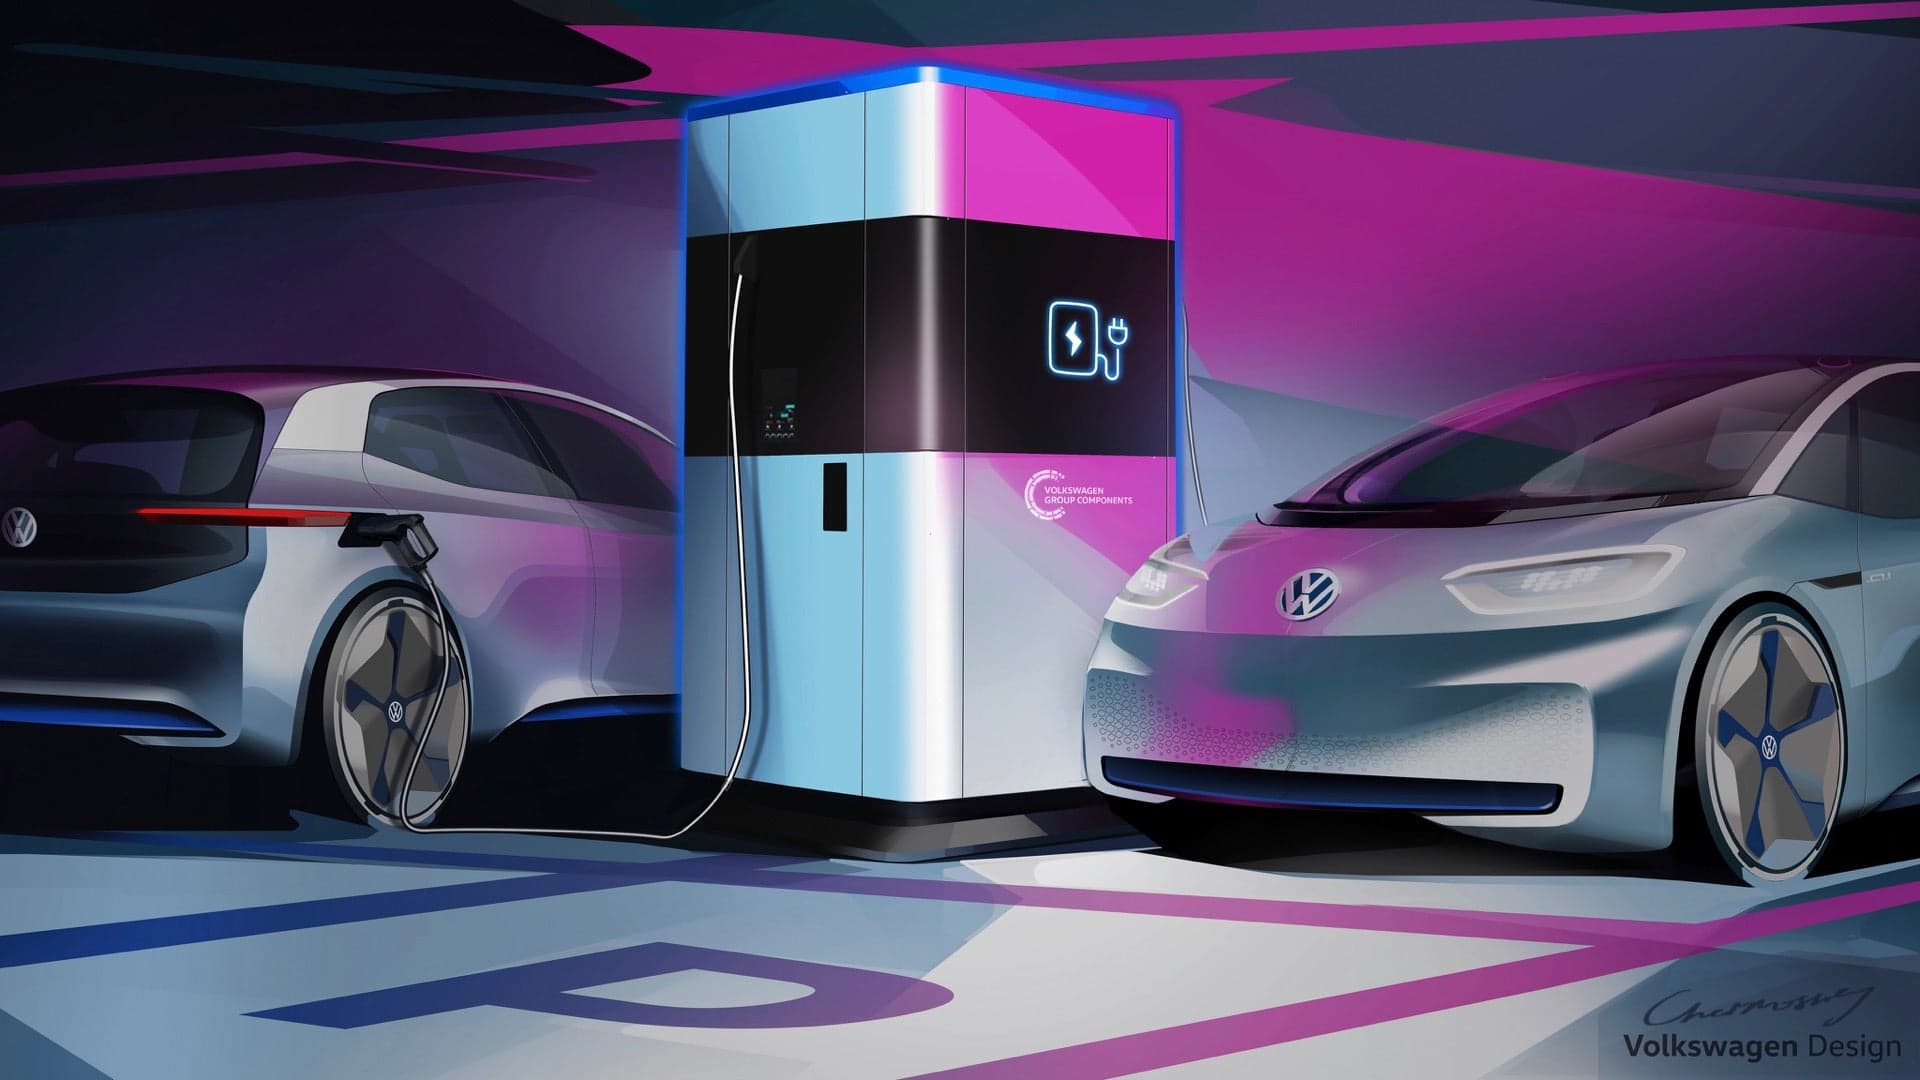 Volkswagen Reveals Mobile EV Charging Station That Can Perform Full Recharge in 17 Minutes